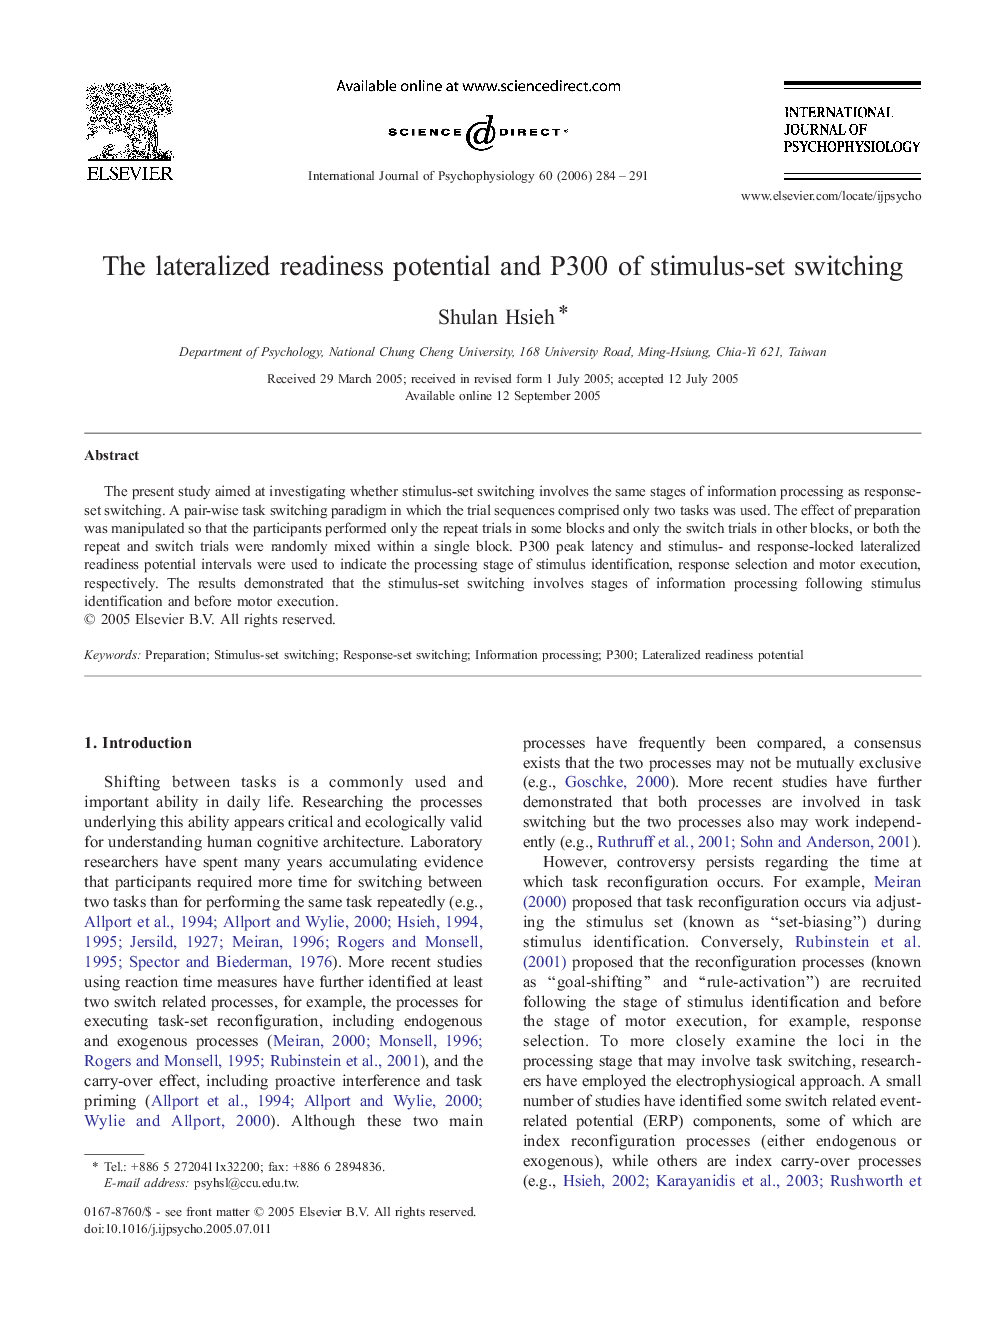 The lateralized readiness potential and P300 of stimulus-set switching